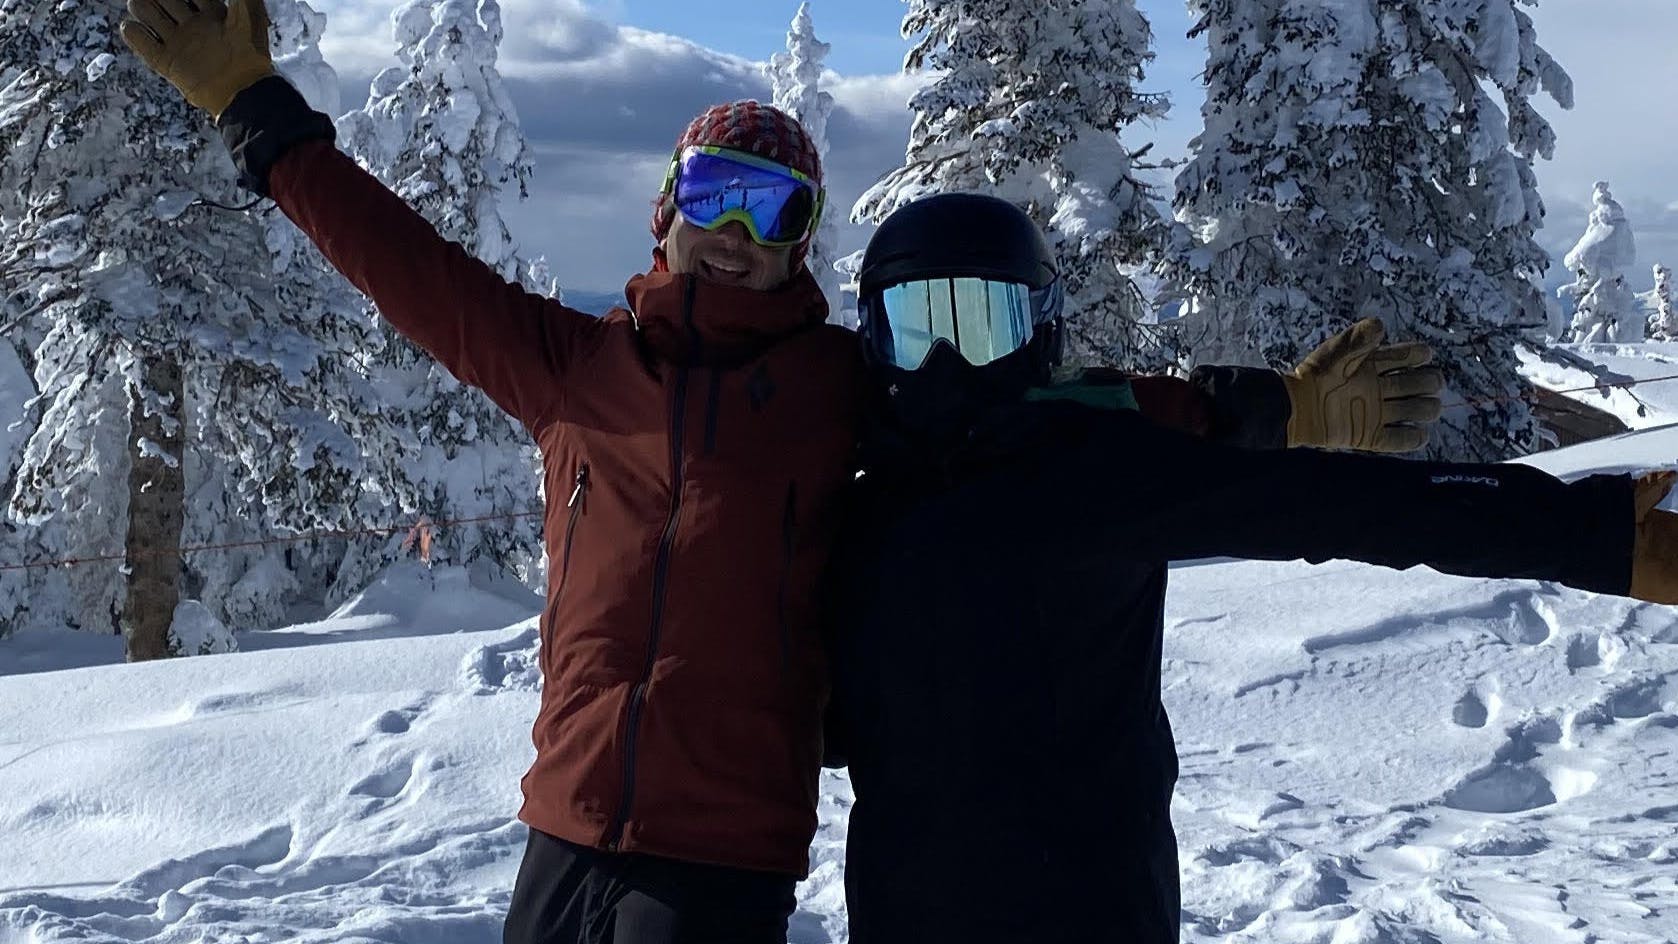 Two skiers stand at the top of a snowy mountain with their arms outstretched. There are snowy trees behind them. 